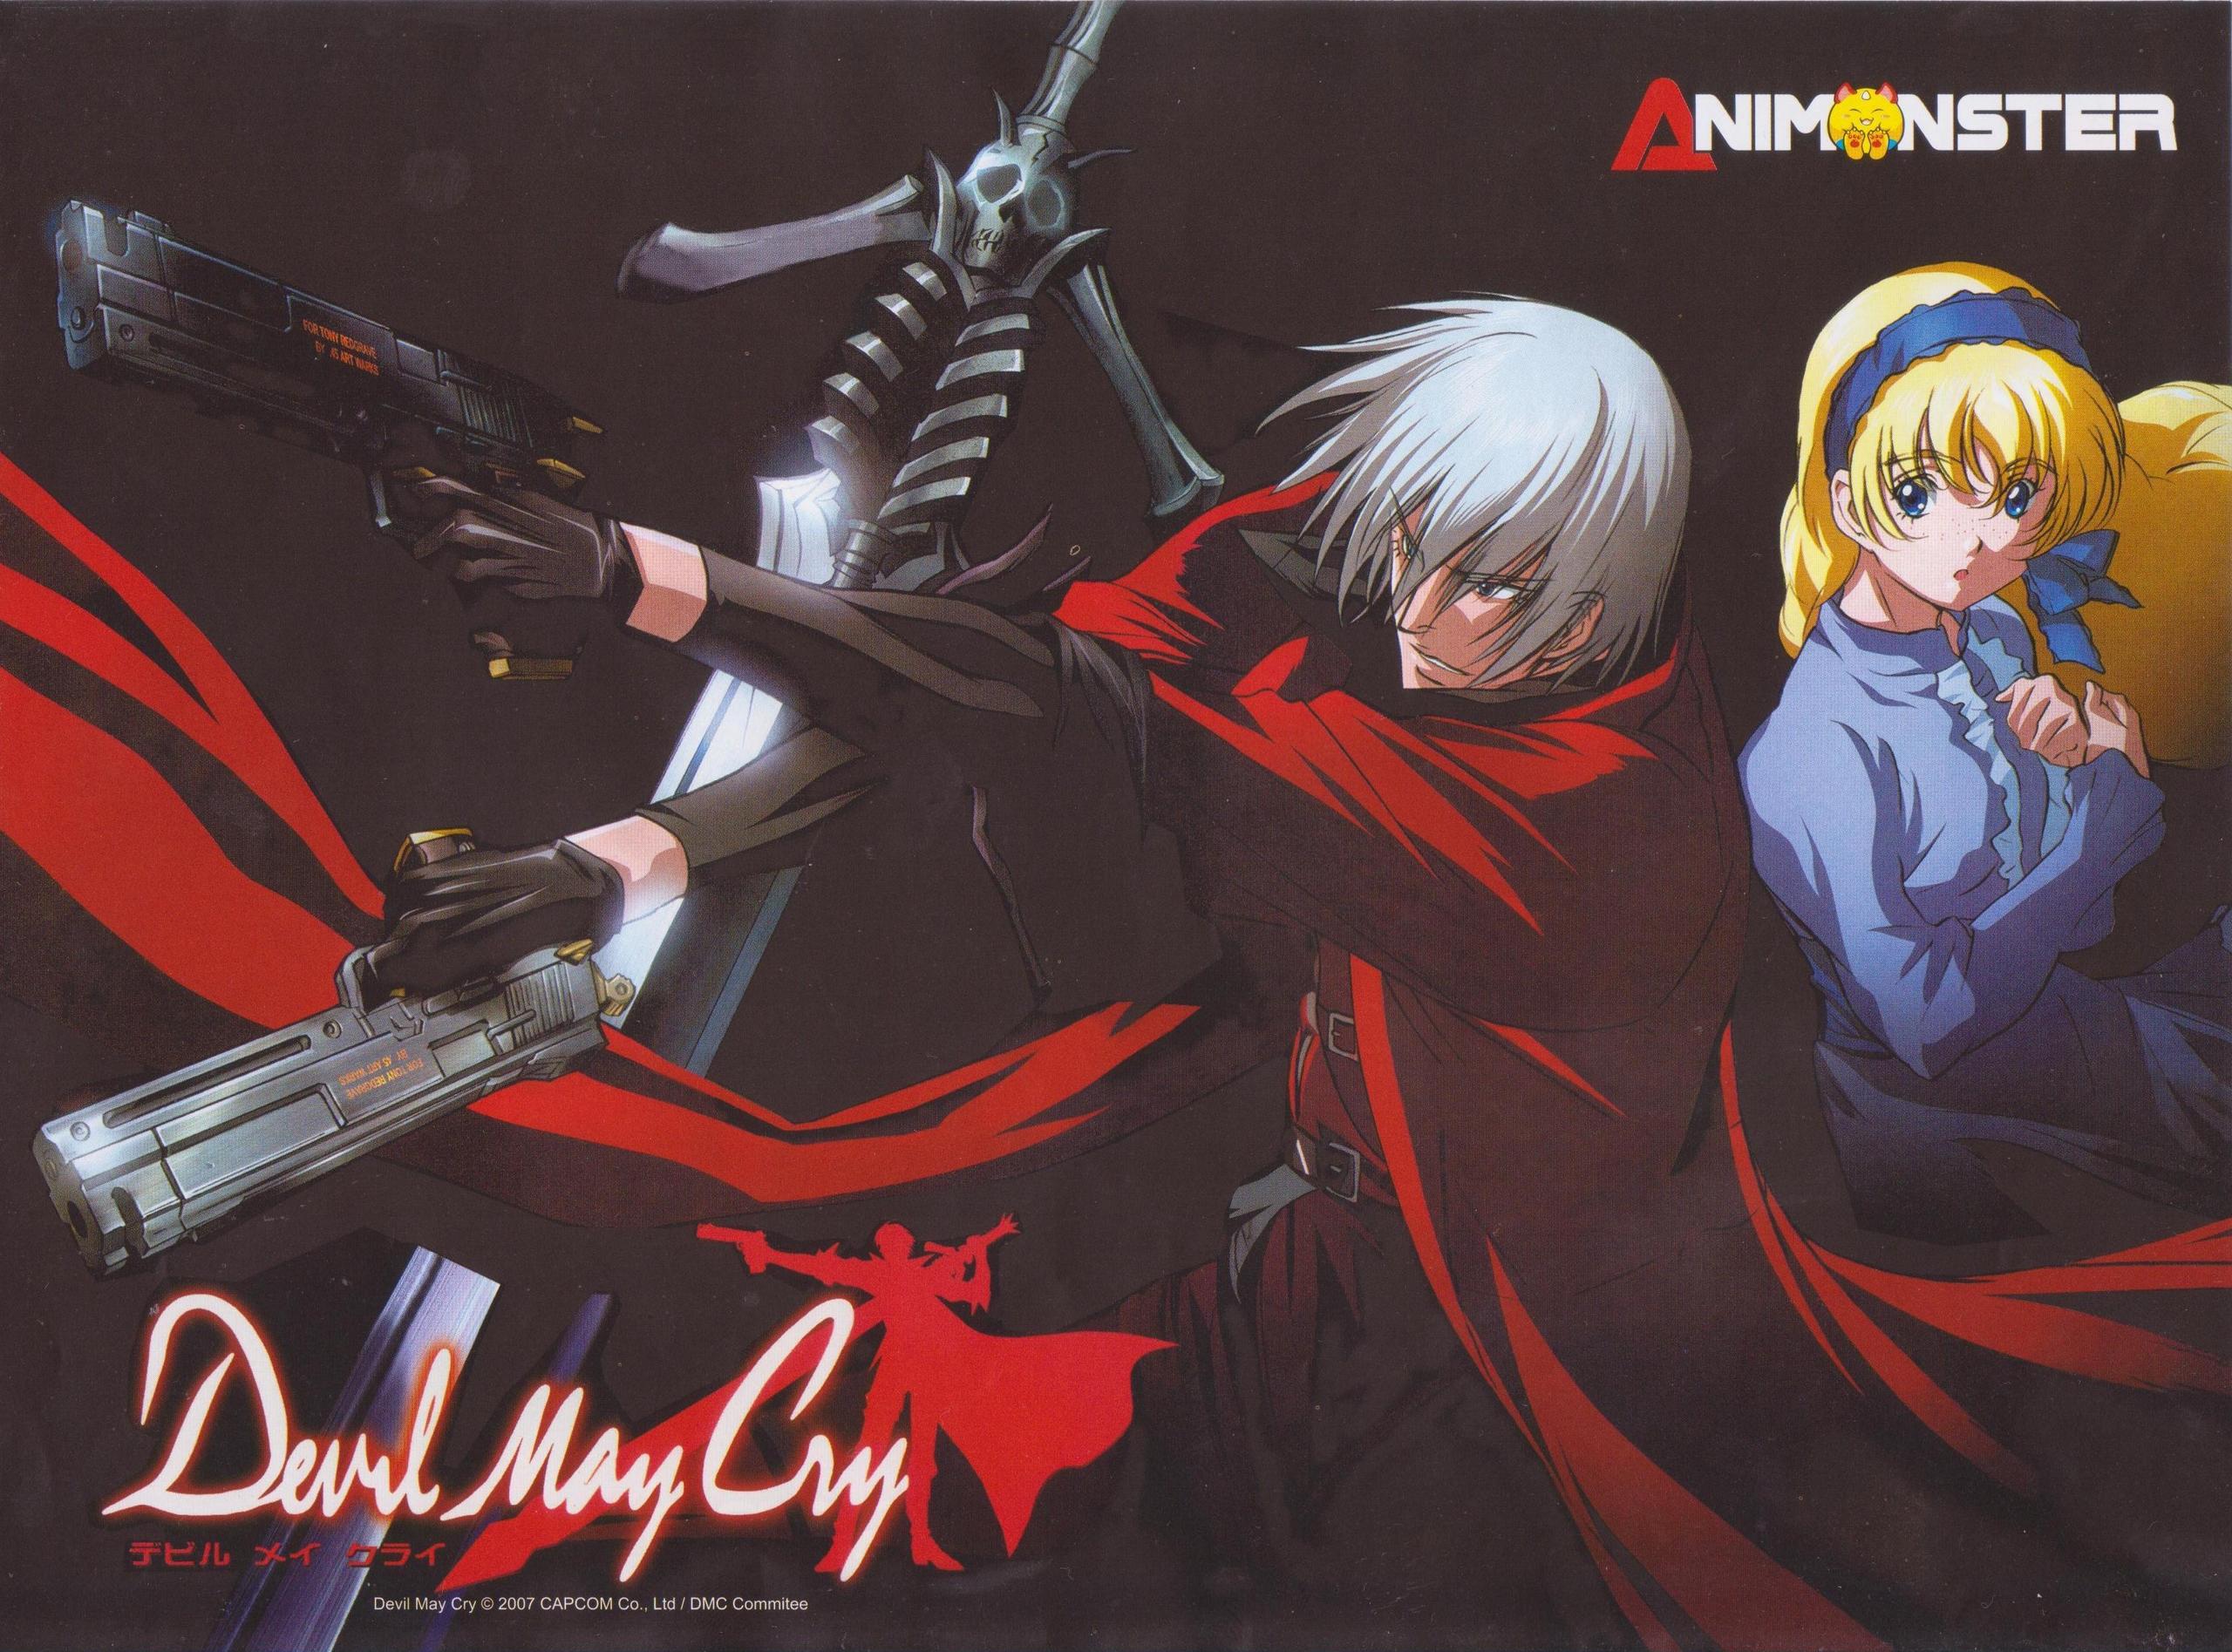 Devil May Cry Netflix anime season 1 script is complete Vergil  Lady to  appear